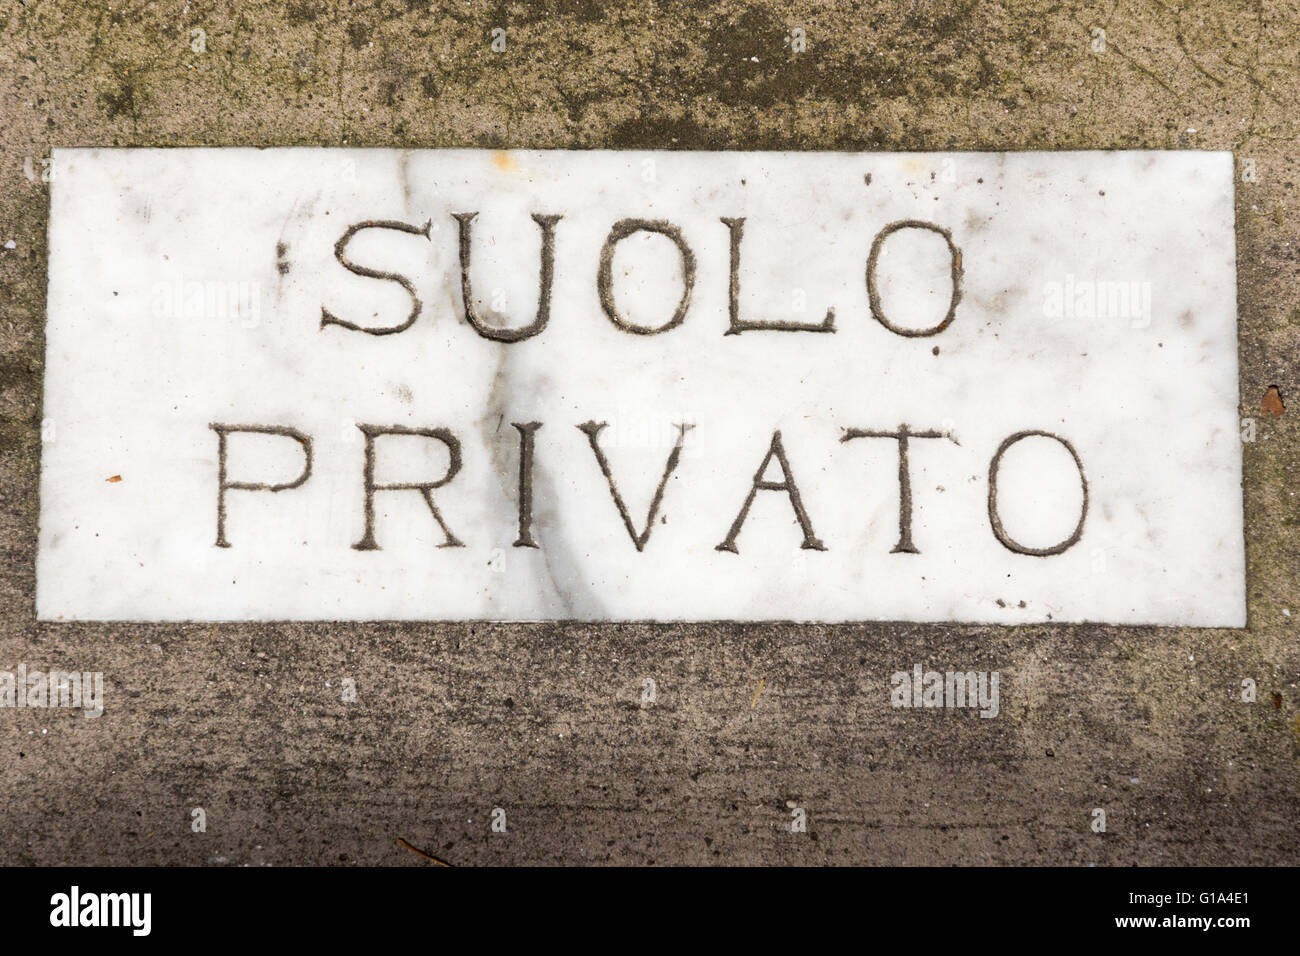 Engraved marble in the pavement with the words Suolo Privato in Italian  meaning 'Private Property' outside a house in Sorrento, Italy Stock Photo -  Alamy